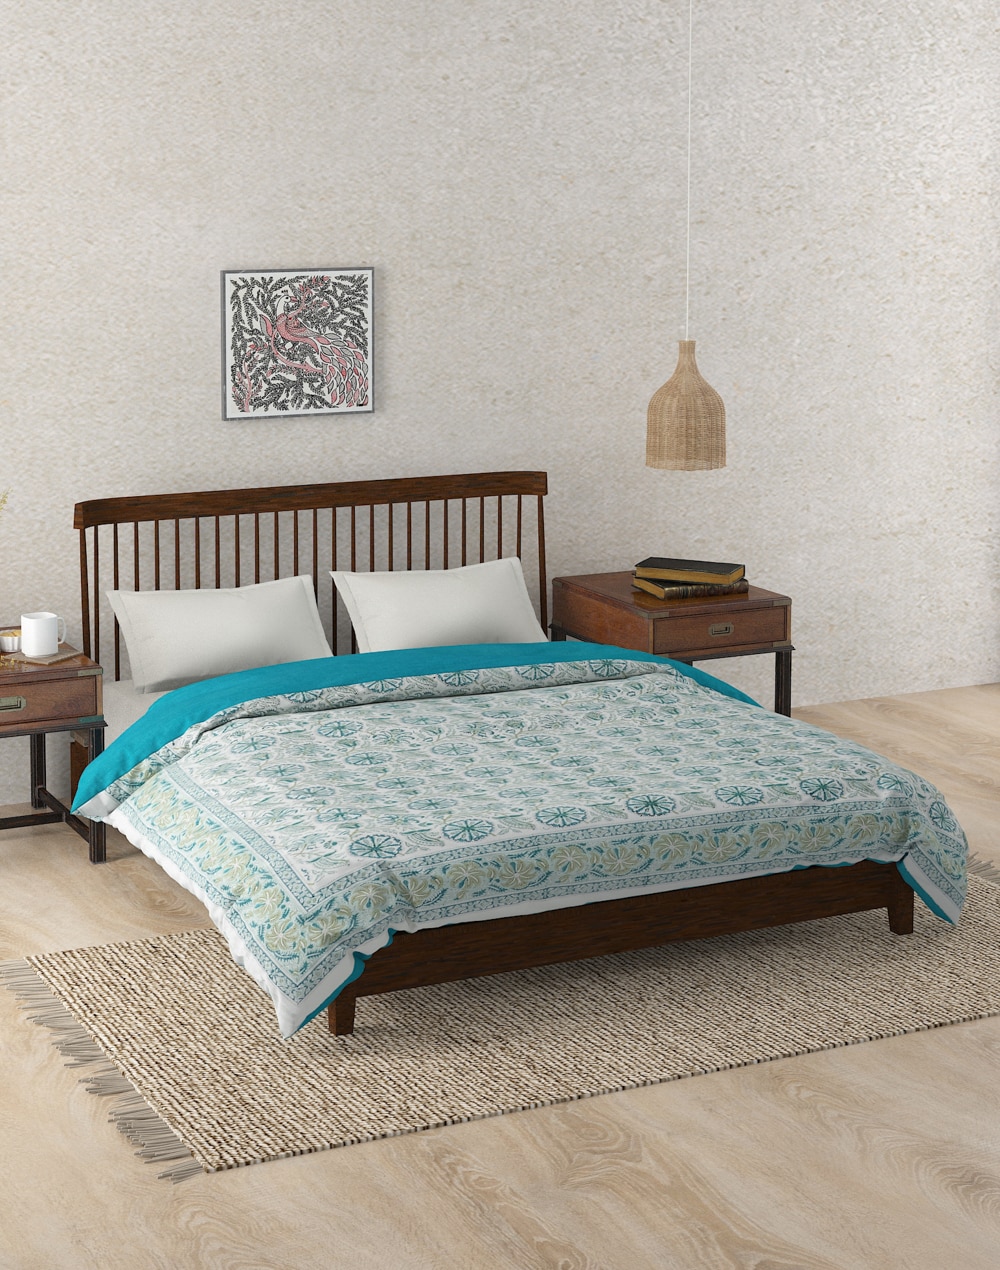 Teal Marika Jaal Cotton Hand Block Printed Duvet Cover Double